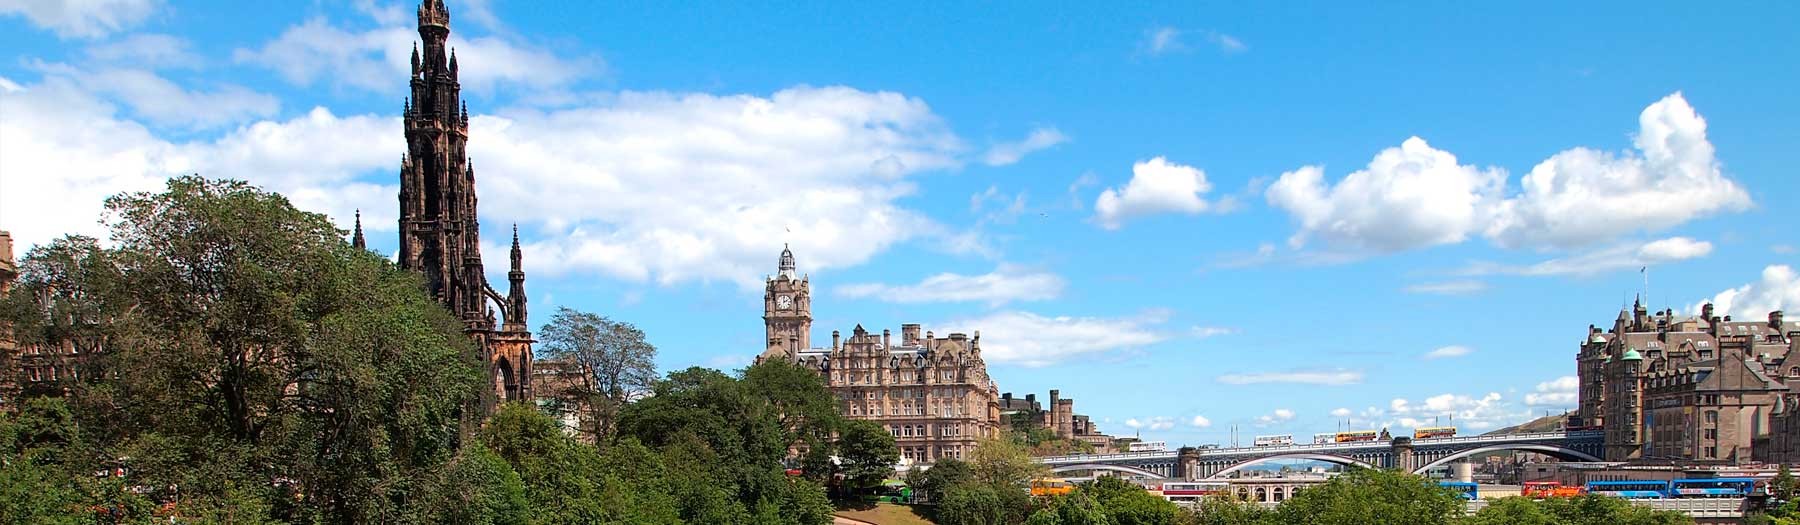 Image: Princes Street Gardens. Credit: Image republished with kind permission of VisitScotland.